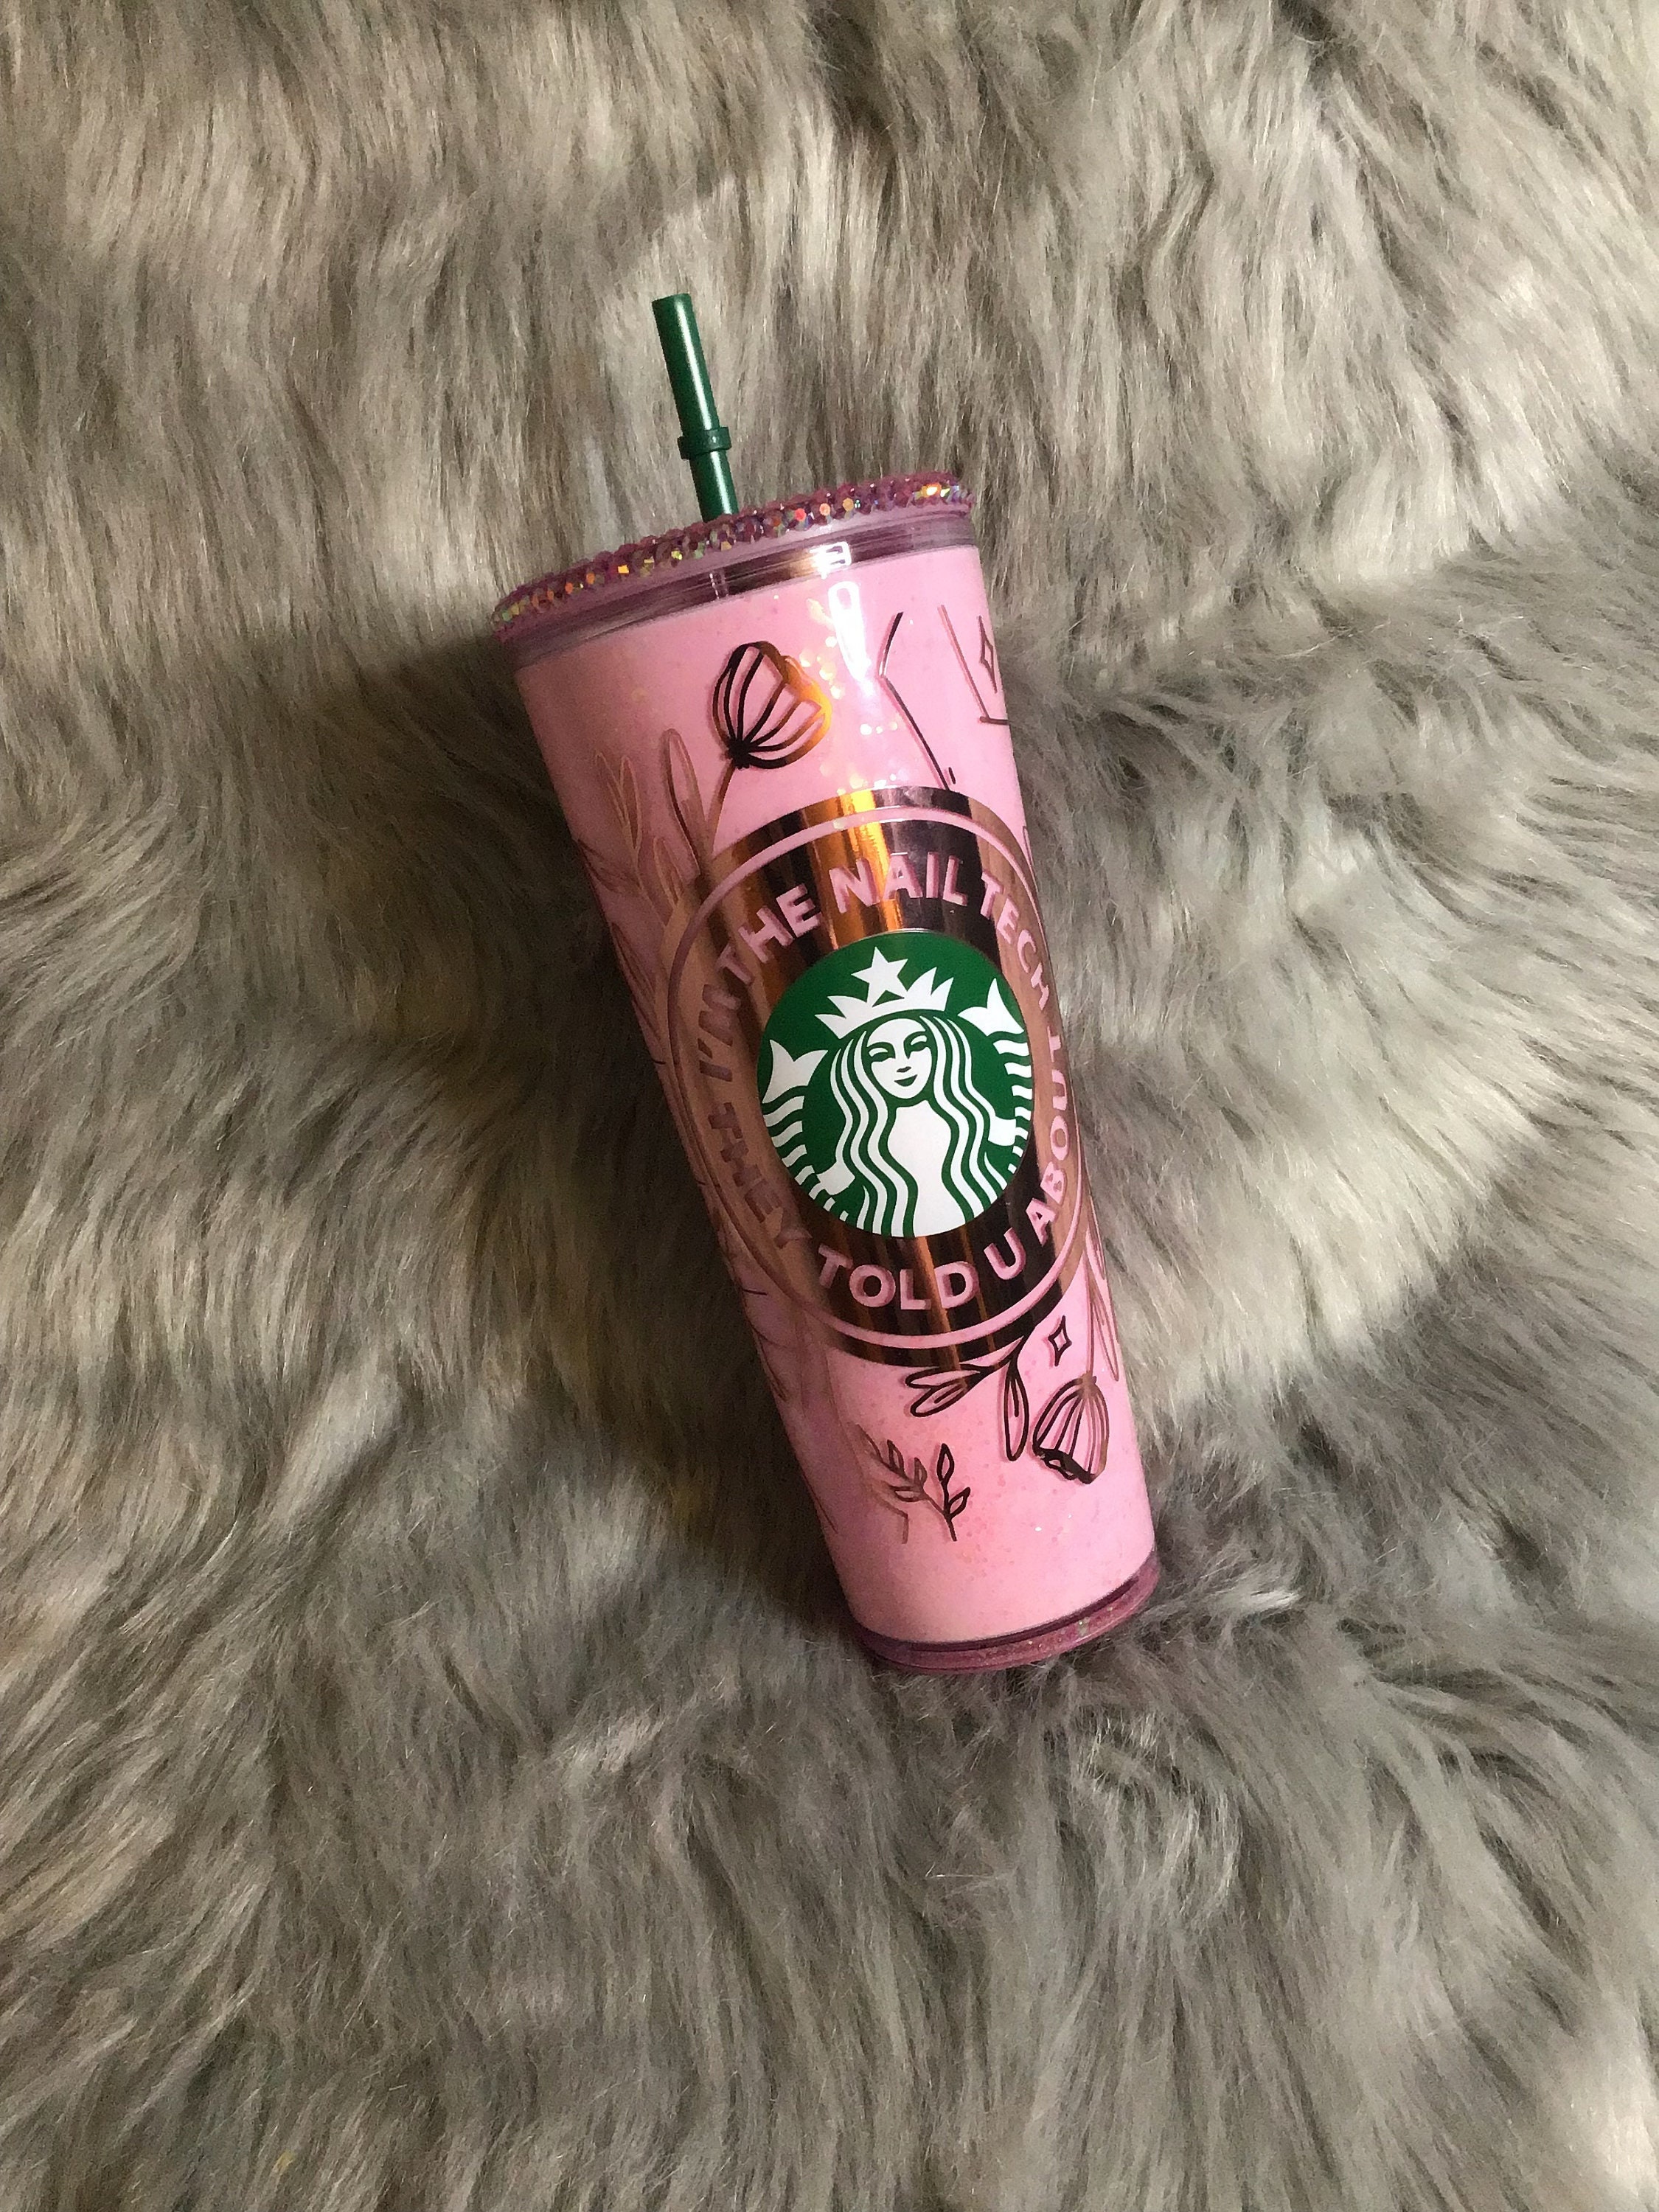 Gobelet personnalisé Starbucks - Cup Starbucks - Cold Cup